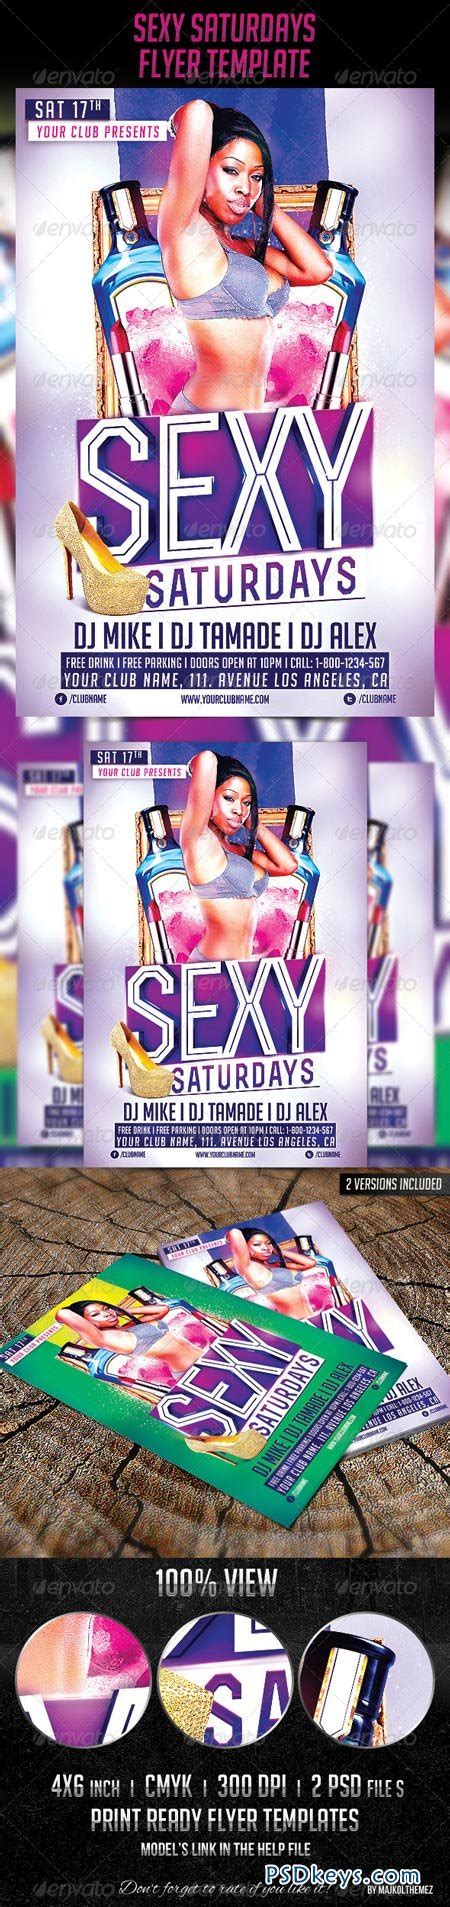 Sexy Saturdays Party Flyer Template 6533815 Free Download Photoshop